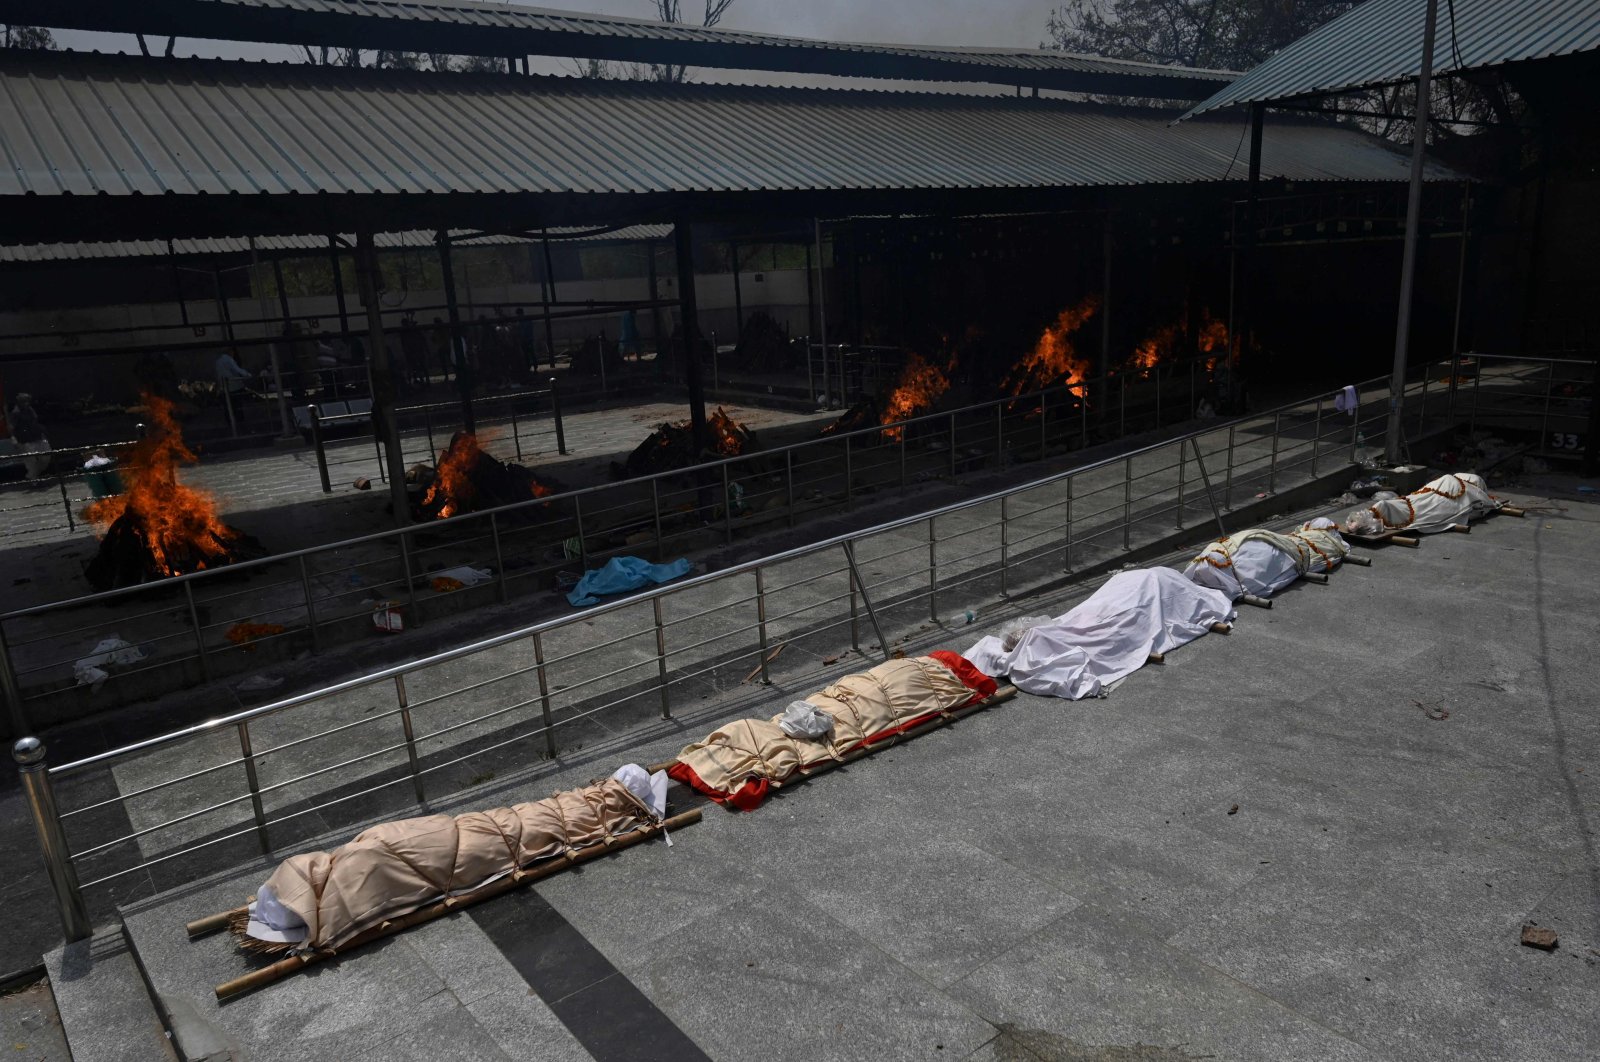 Bodies of COVID-19 victims are lined up before cremation at a cremation ground in New Delhi, India, April 28, 2021. (Money SHARMA via AFP)